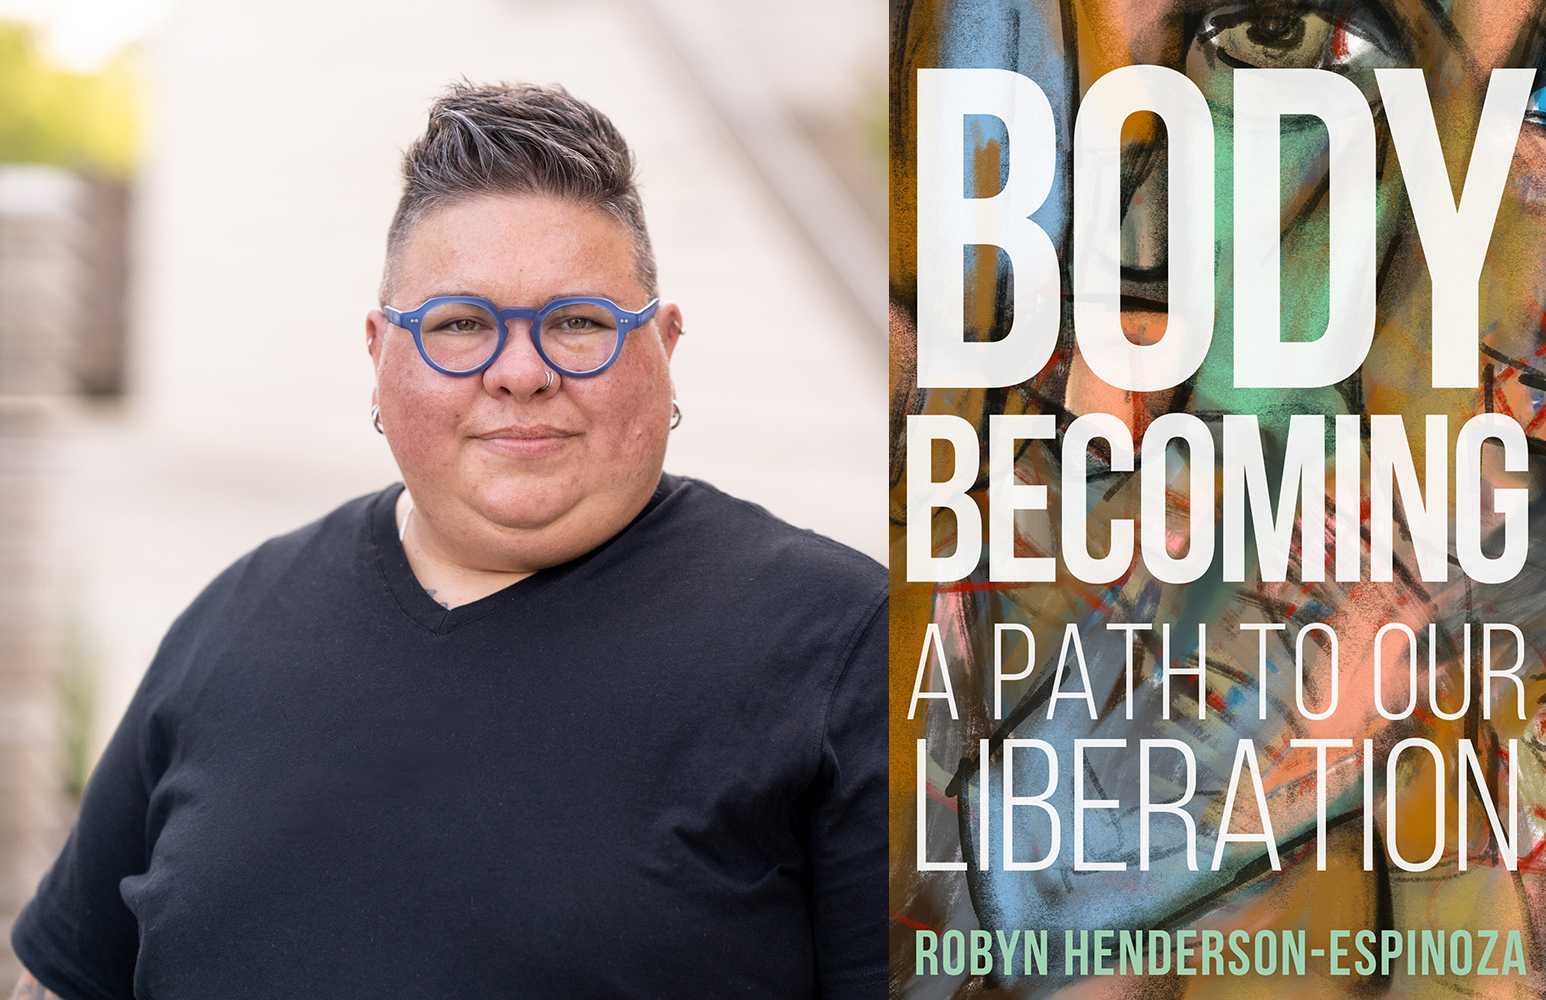 “Body Becoming: A Path to Our Liberation" and author Robyn Henderson-Espinoza. Courtesy images